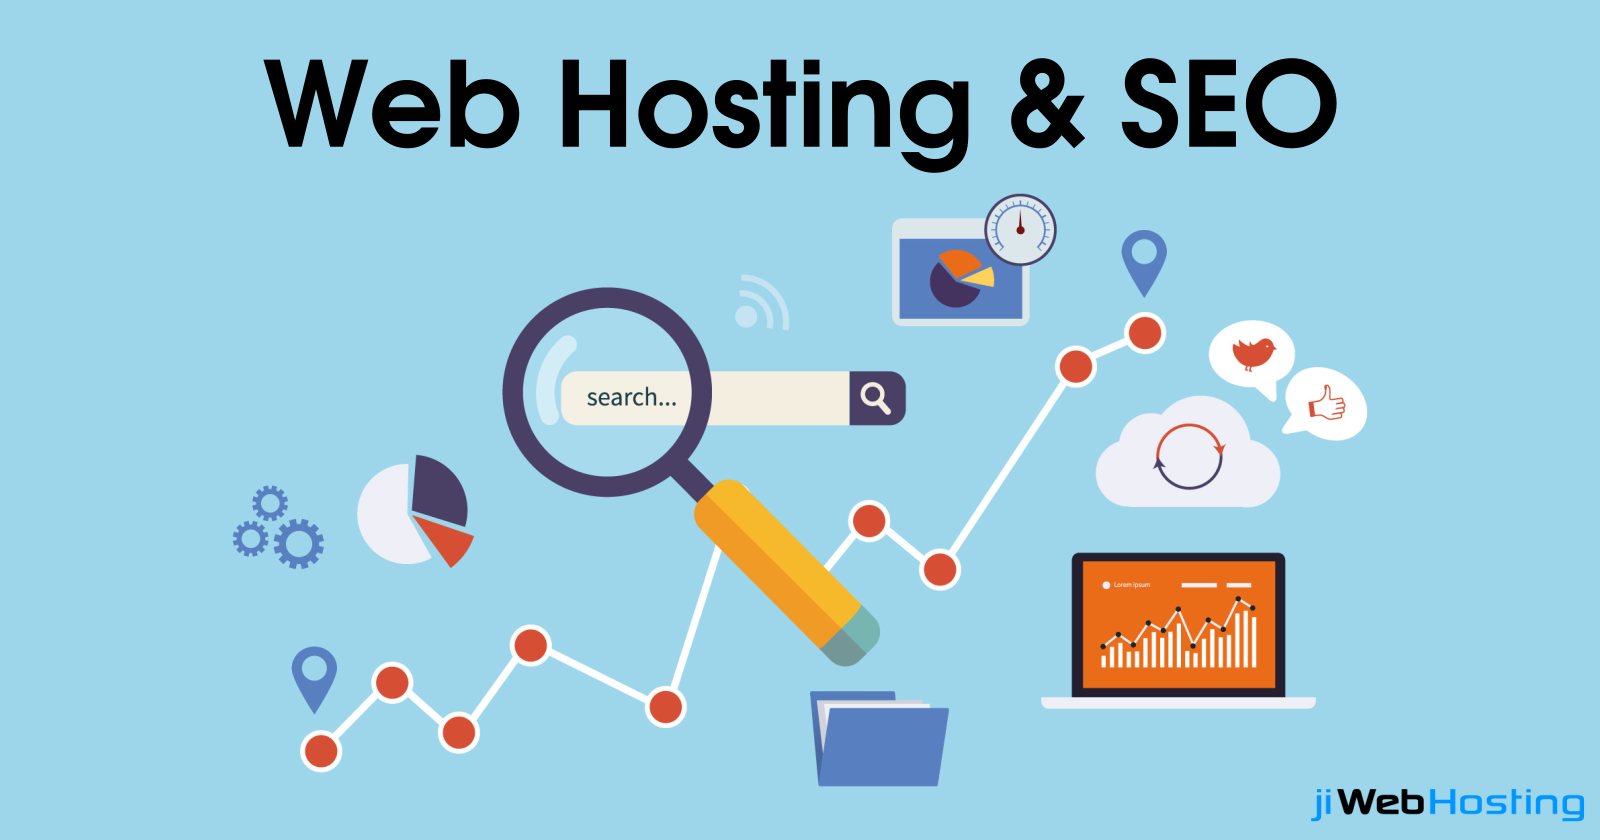 Can the Web Hosting Plan Affect the SEO of Your Website?